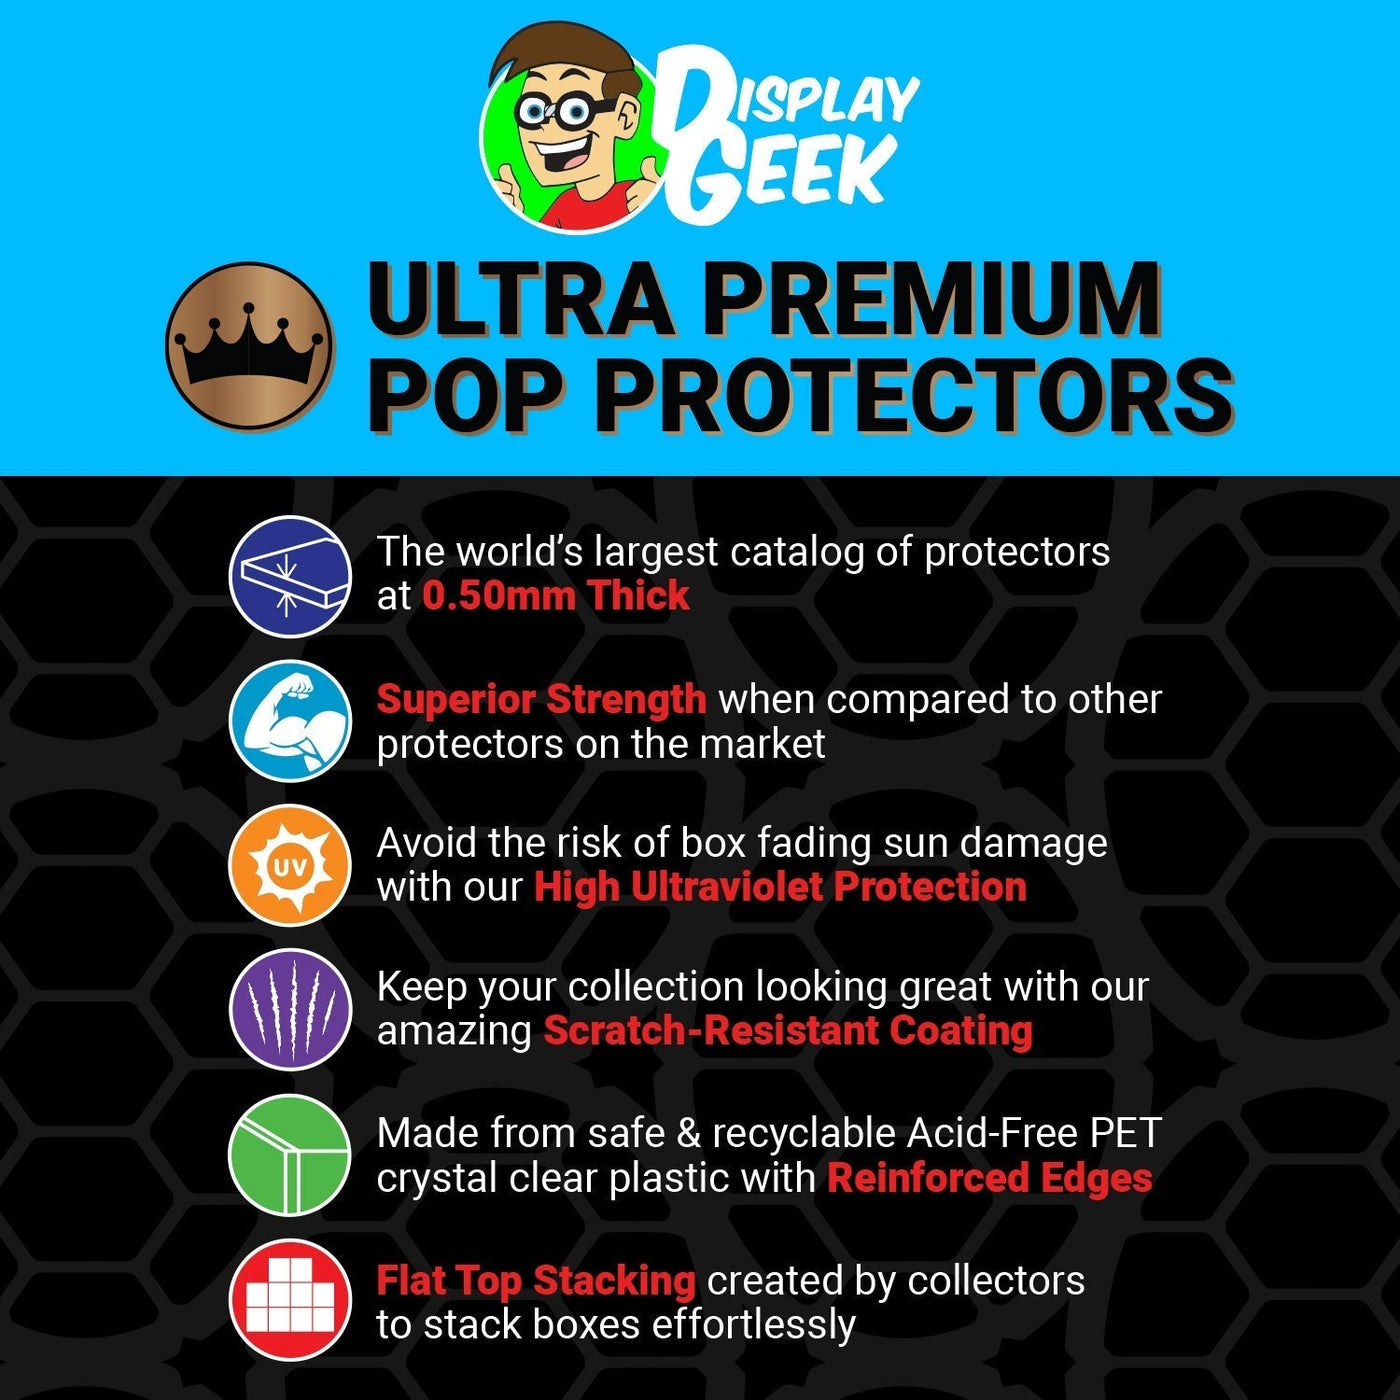 Pop Protector for Pop & Tee Marvin the Martian Metallic #1085 Funko Box on The Protector Guide App by Display Geek